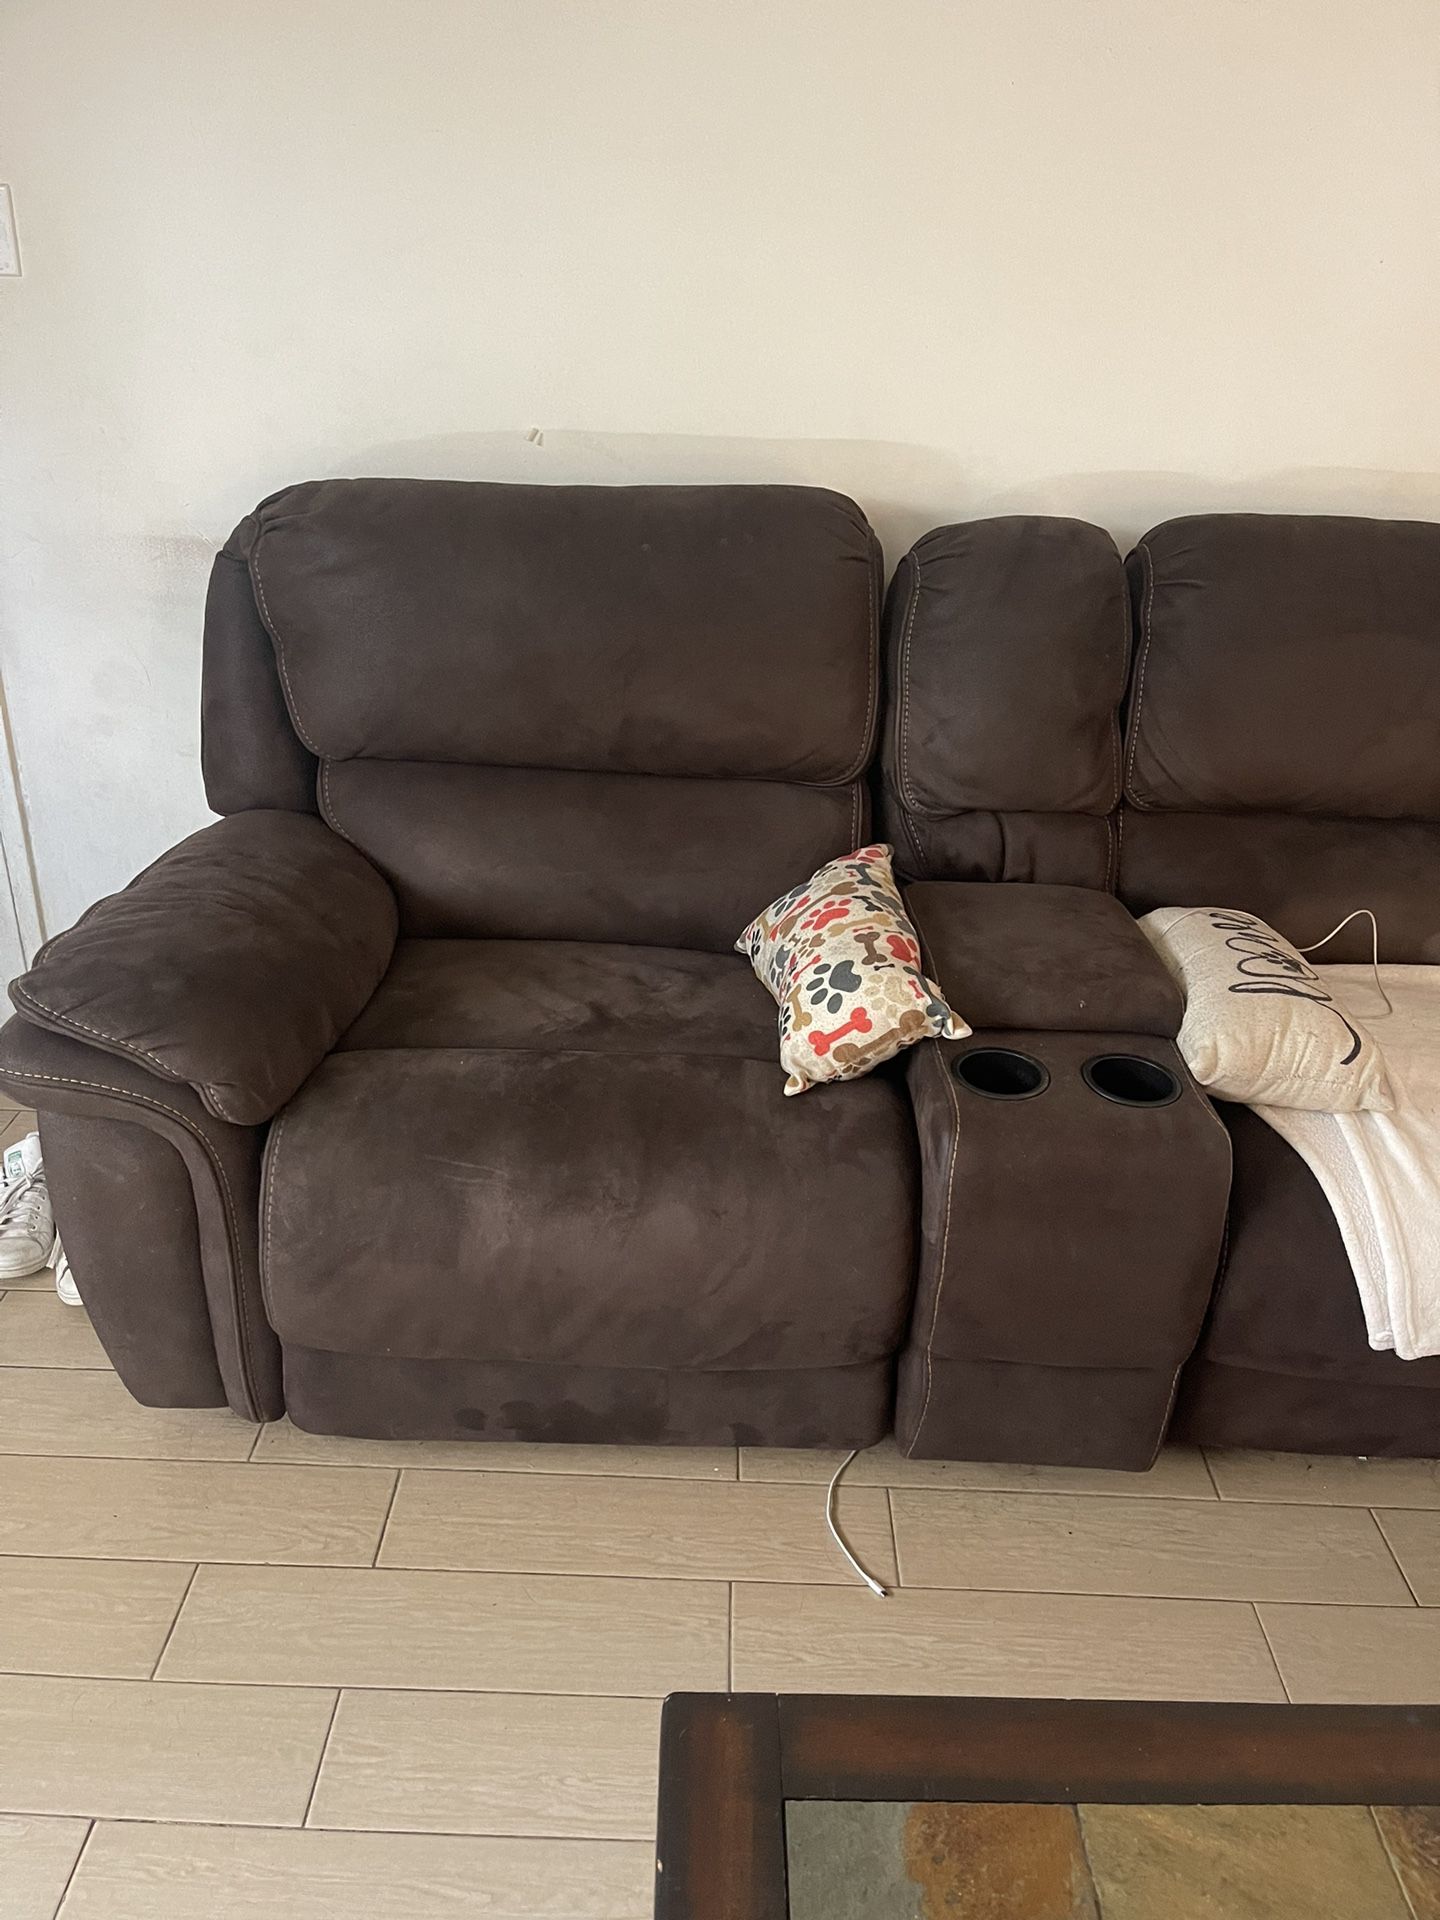 Sectional modular L Shape Couch PENDING PICKUP!!! 